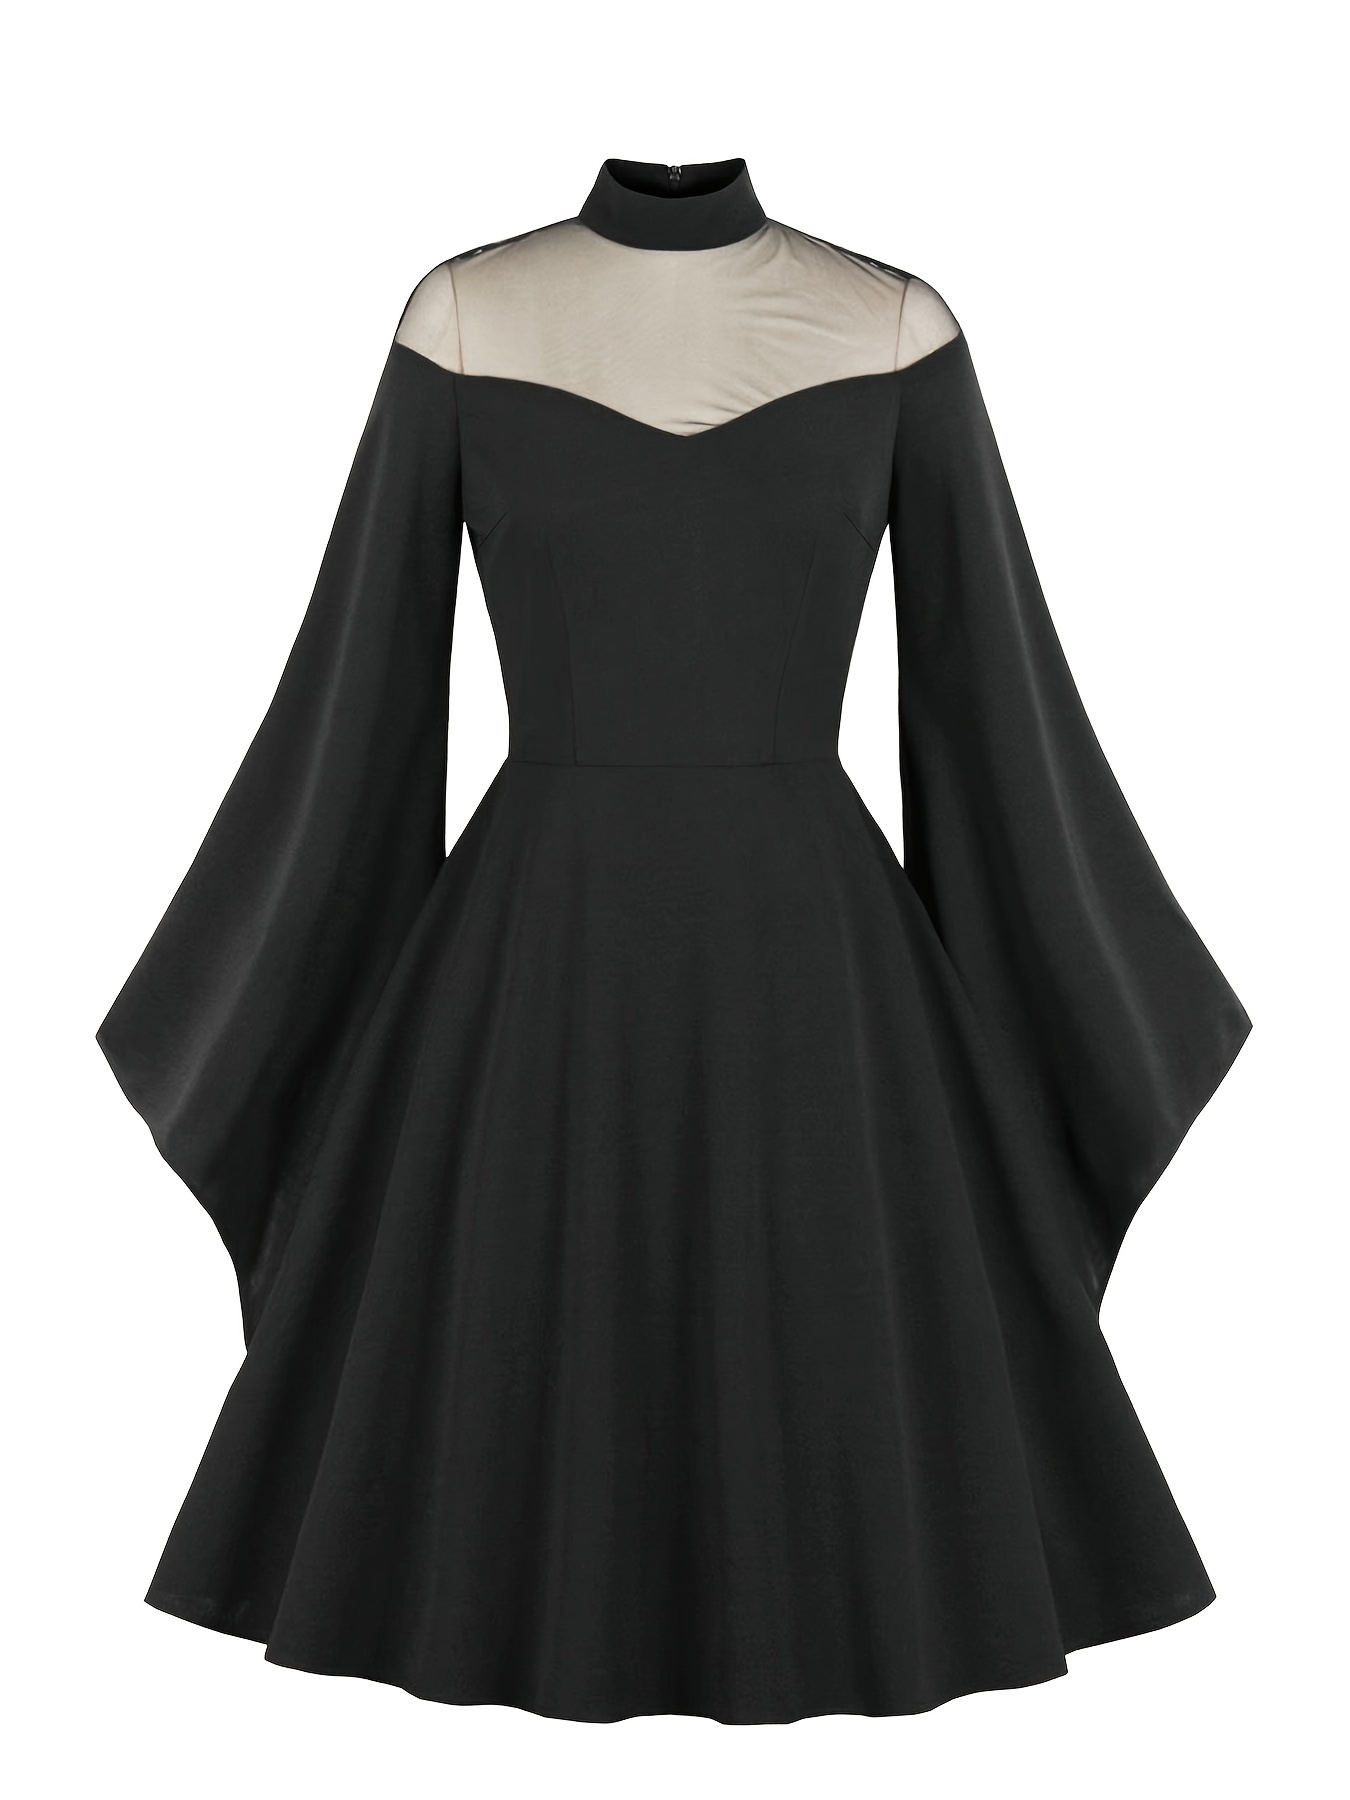 plus size halloween gothic dress womens plus contrast mesh bell sleeve high neck swing party dress